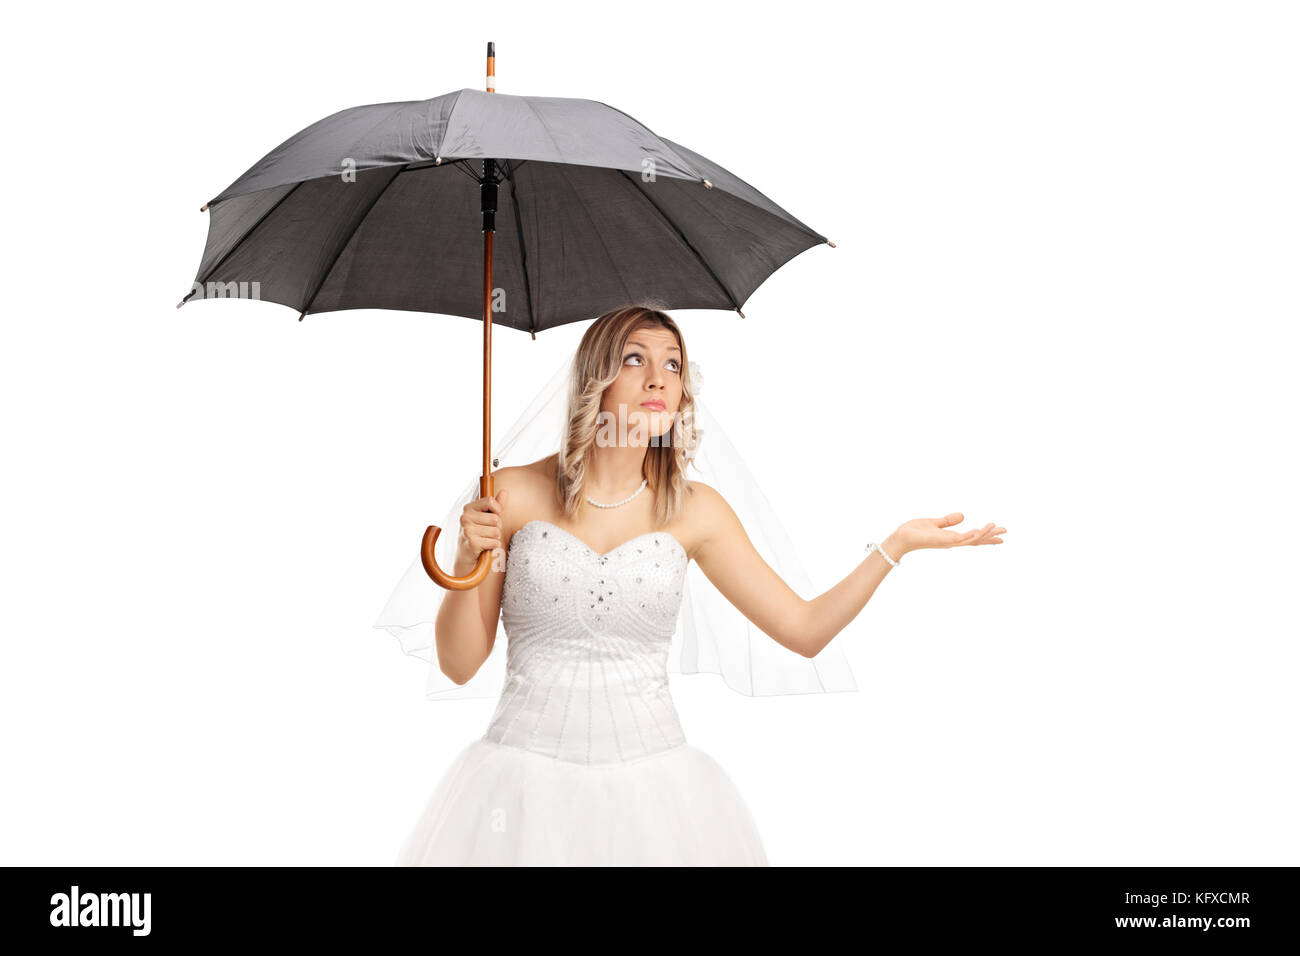 Young bride in a white wedding dress holding an umbrella isolated on white background Stock Photo